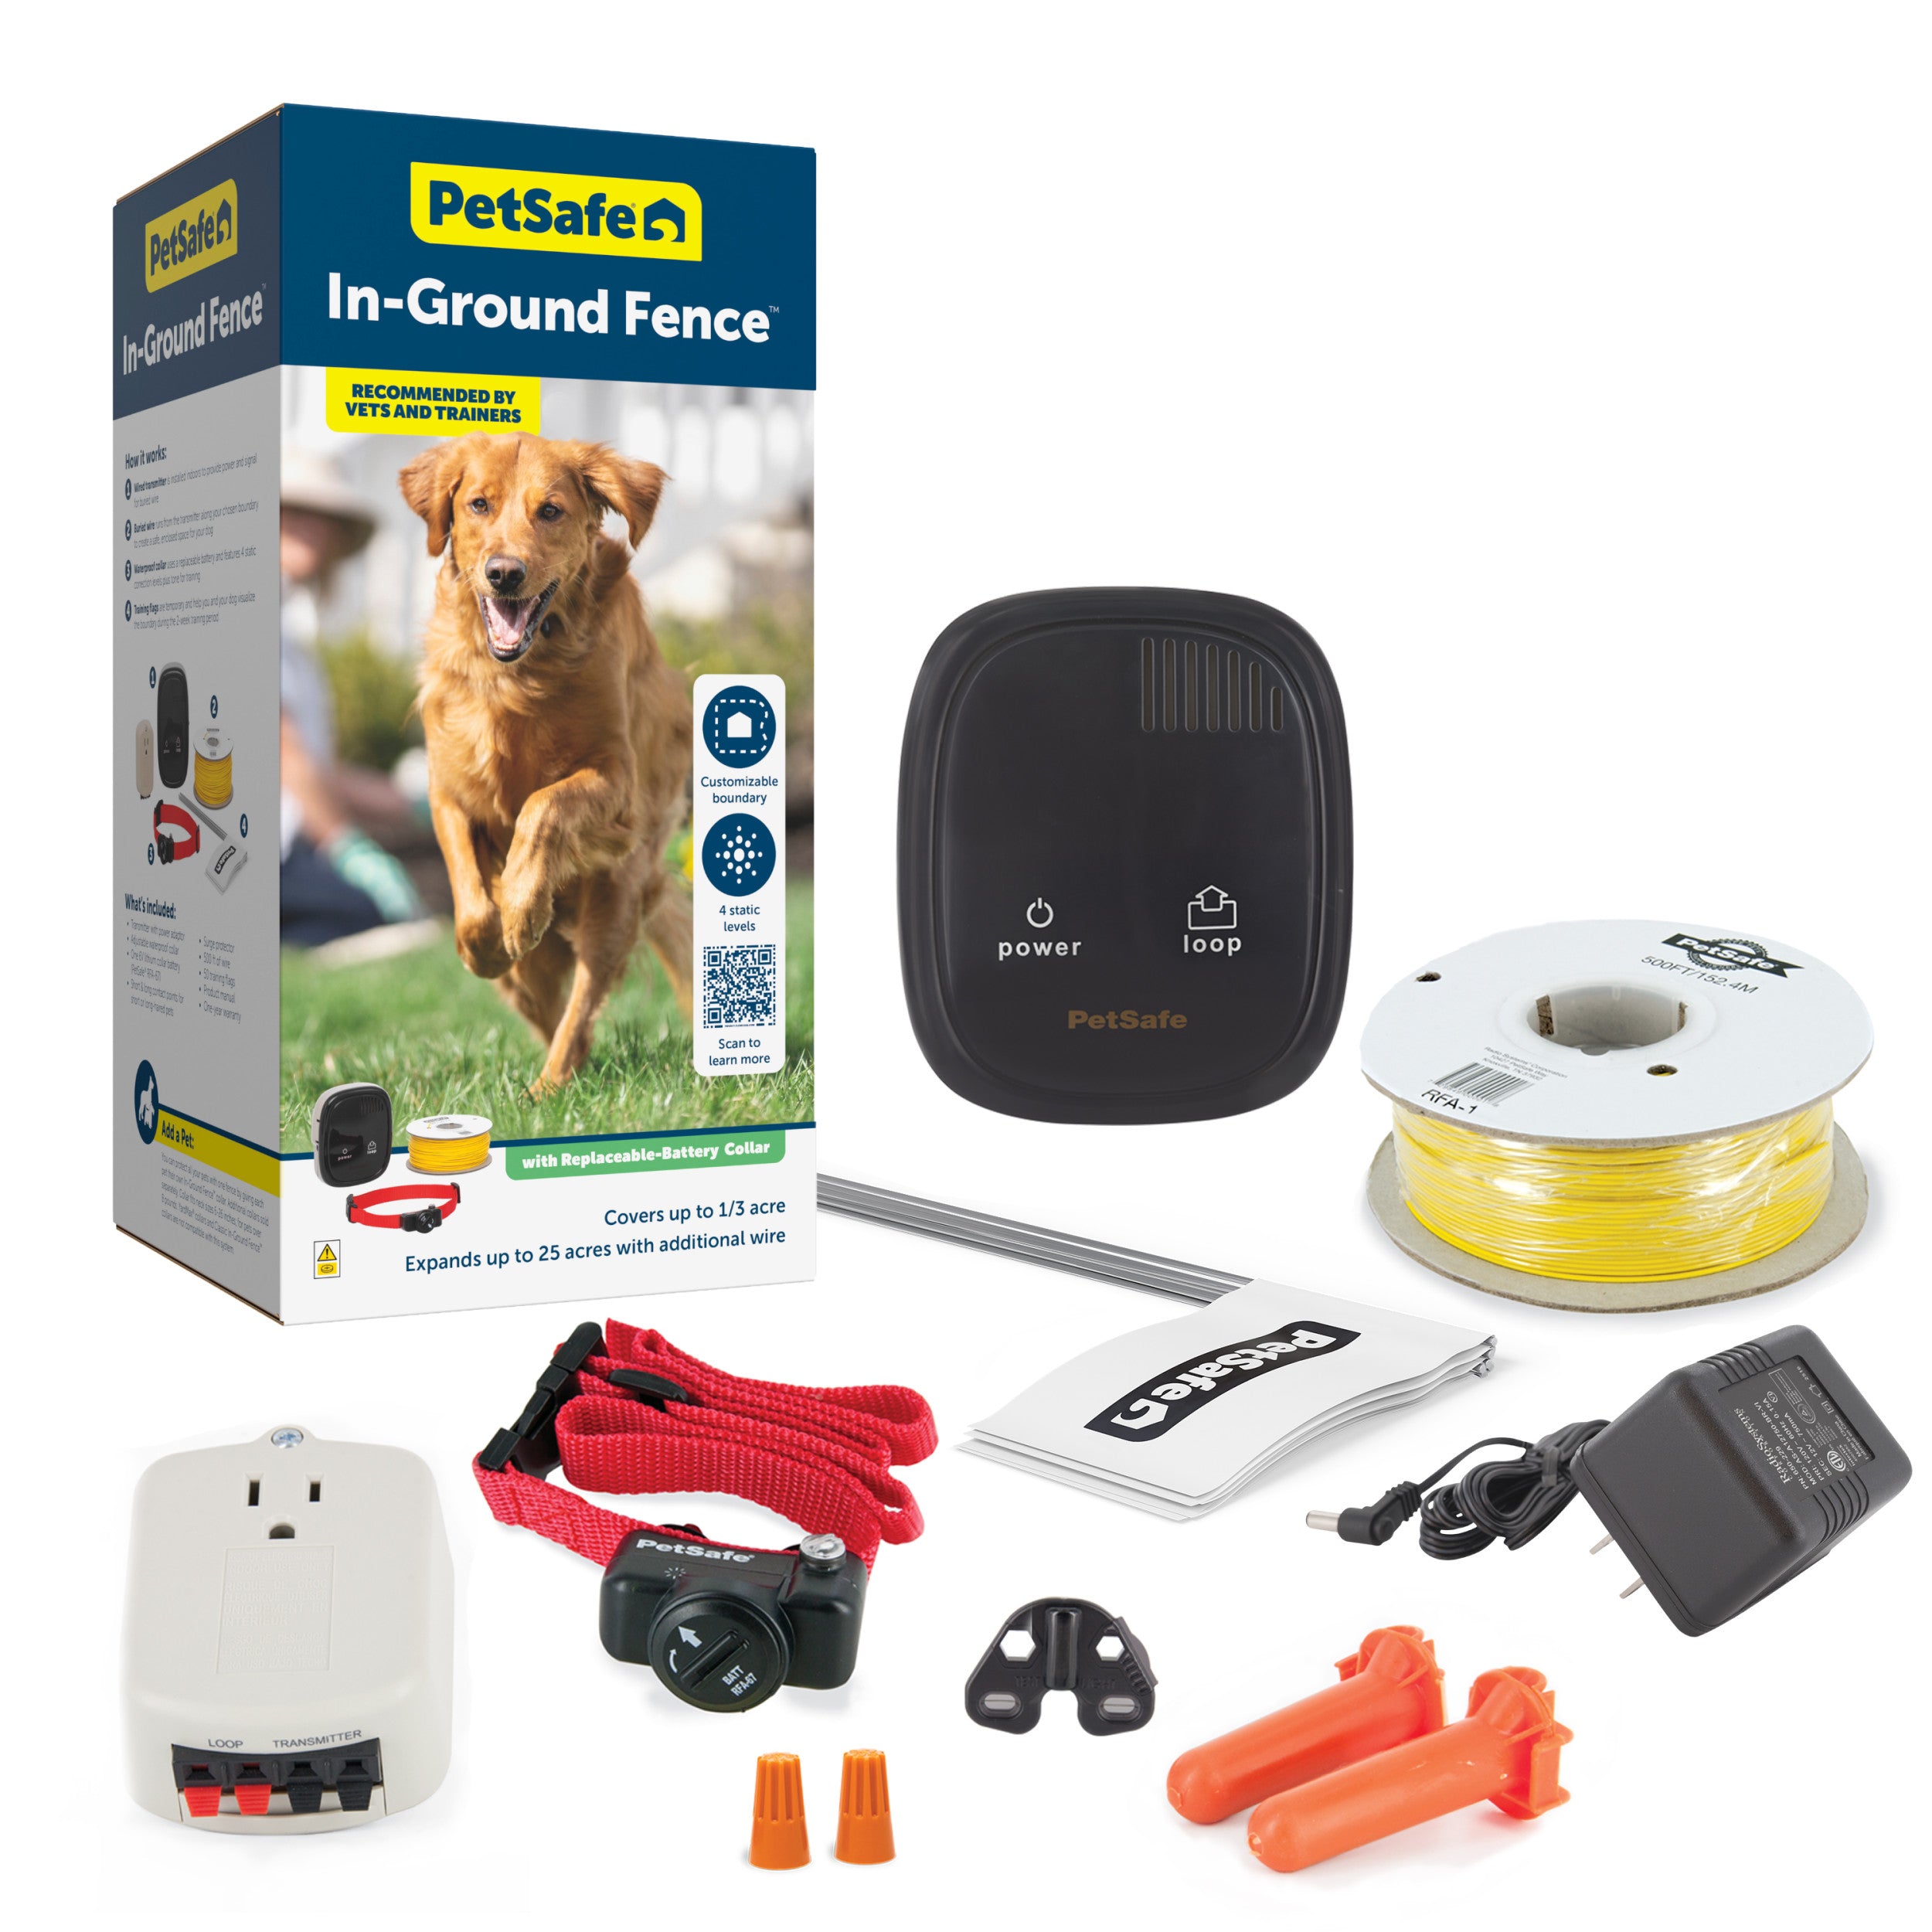 How to Install an Electric Dog Fence in Less than One Hour